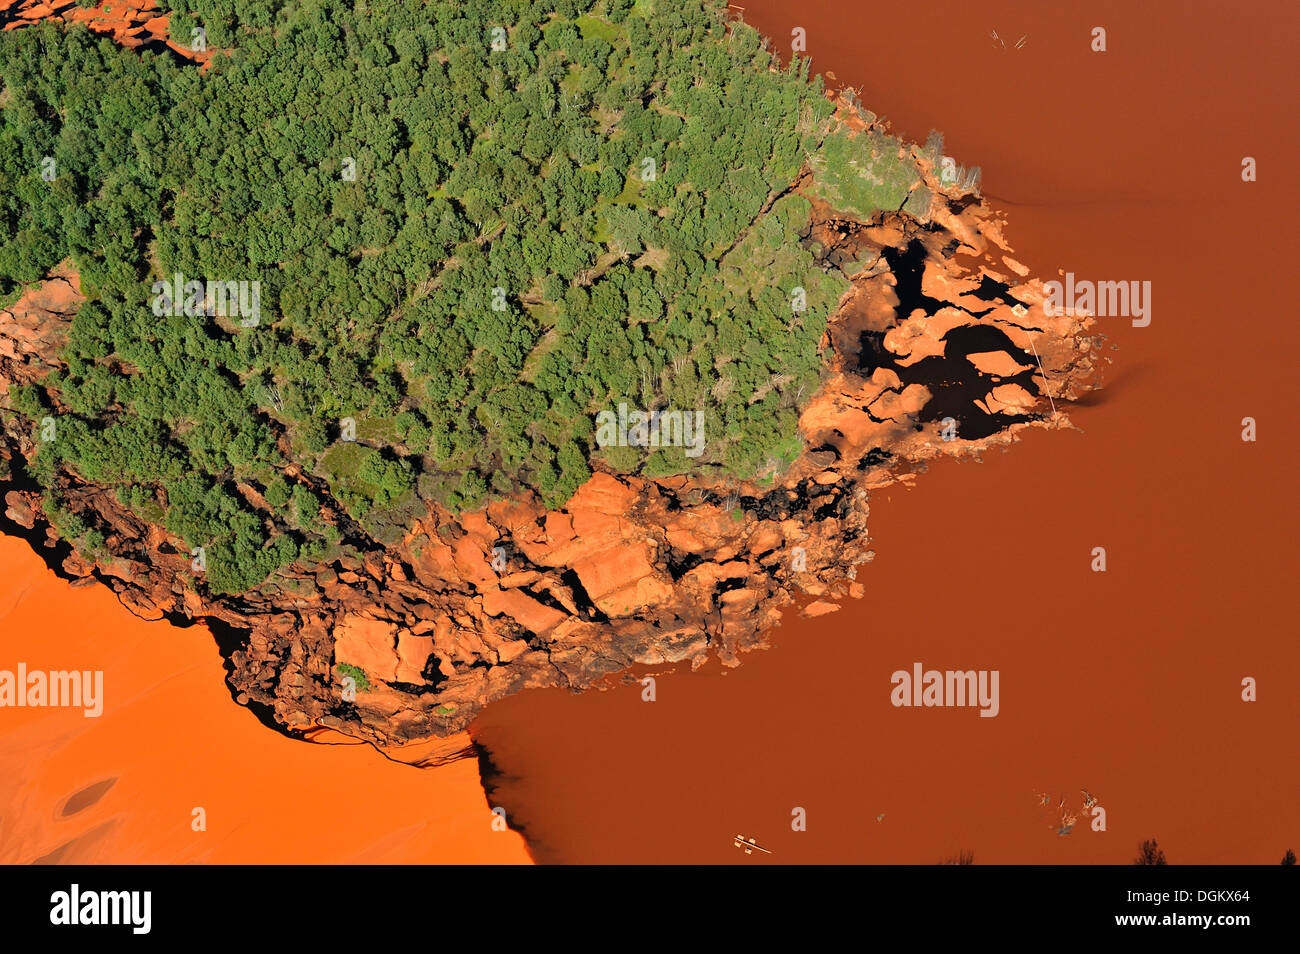 Aerial view, red mud or red sludge deposits, Stade, Stade, Lower Saxony, Germany Stock Photo